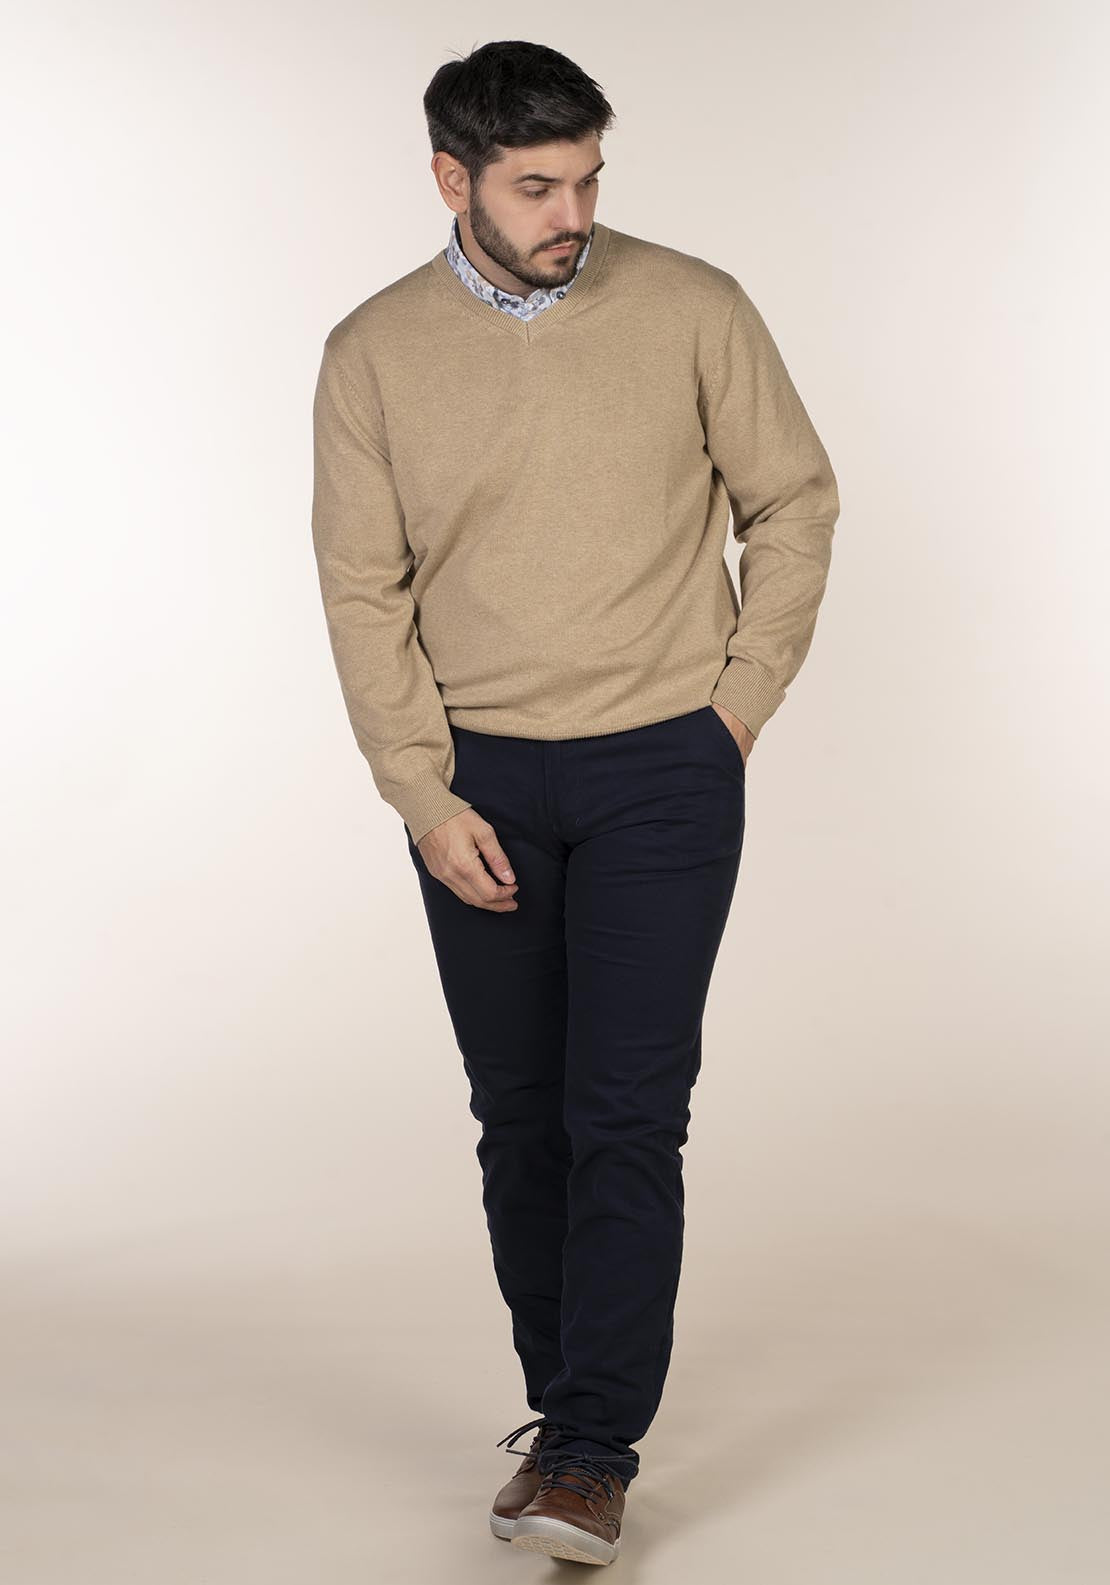 Yeats Plain Cotton V Neck Sweaters - Beige 3 Shaws Department Stores